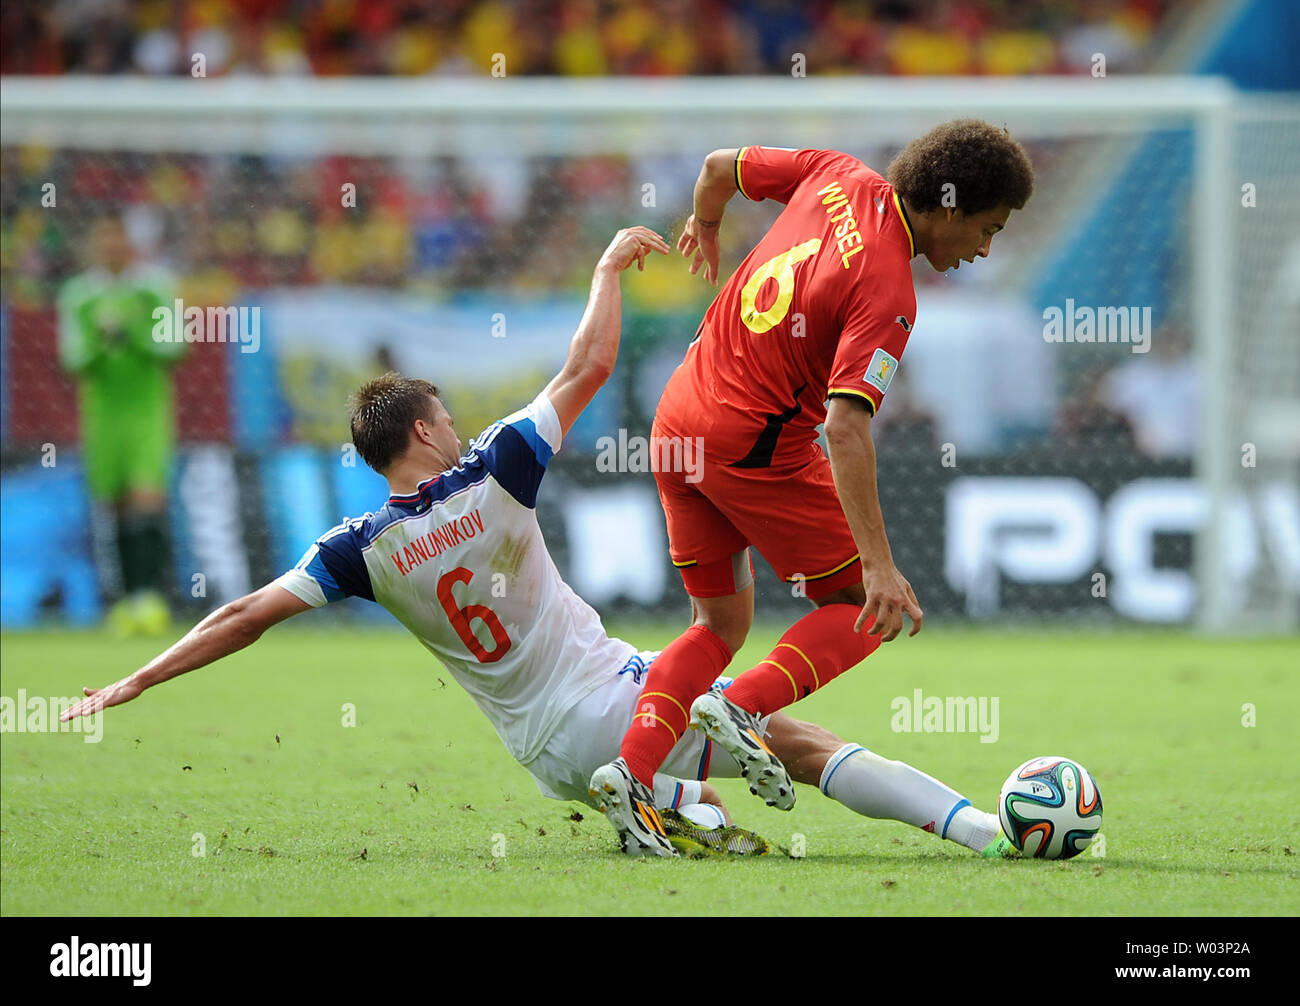 Axel Witsel of Belgium is challenged by Maksim Kanunnikov (L) of Russia during the 2014 FIFA World Cup Group H match at the Estadio do Maracana in Rio de Janeiro, Brazil on June 22, 2014. UPI/Chris Brunskill Stock Photo